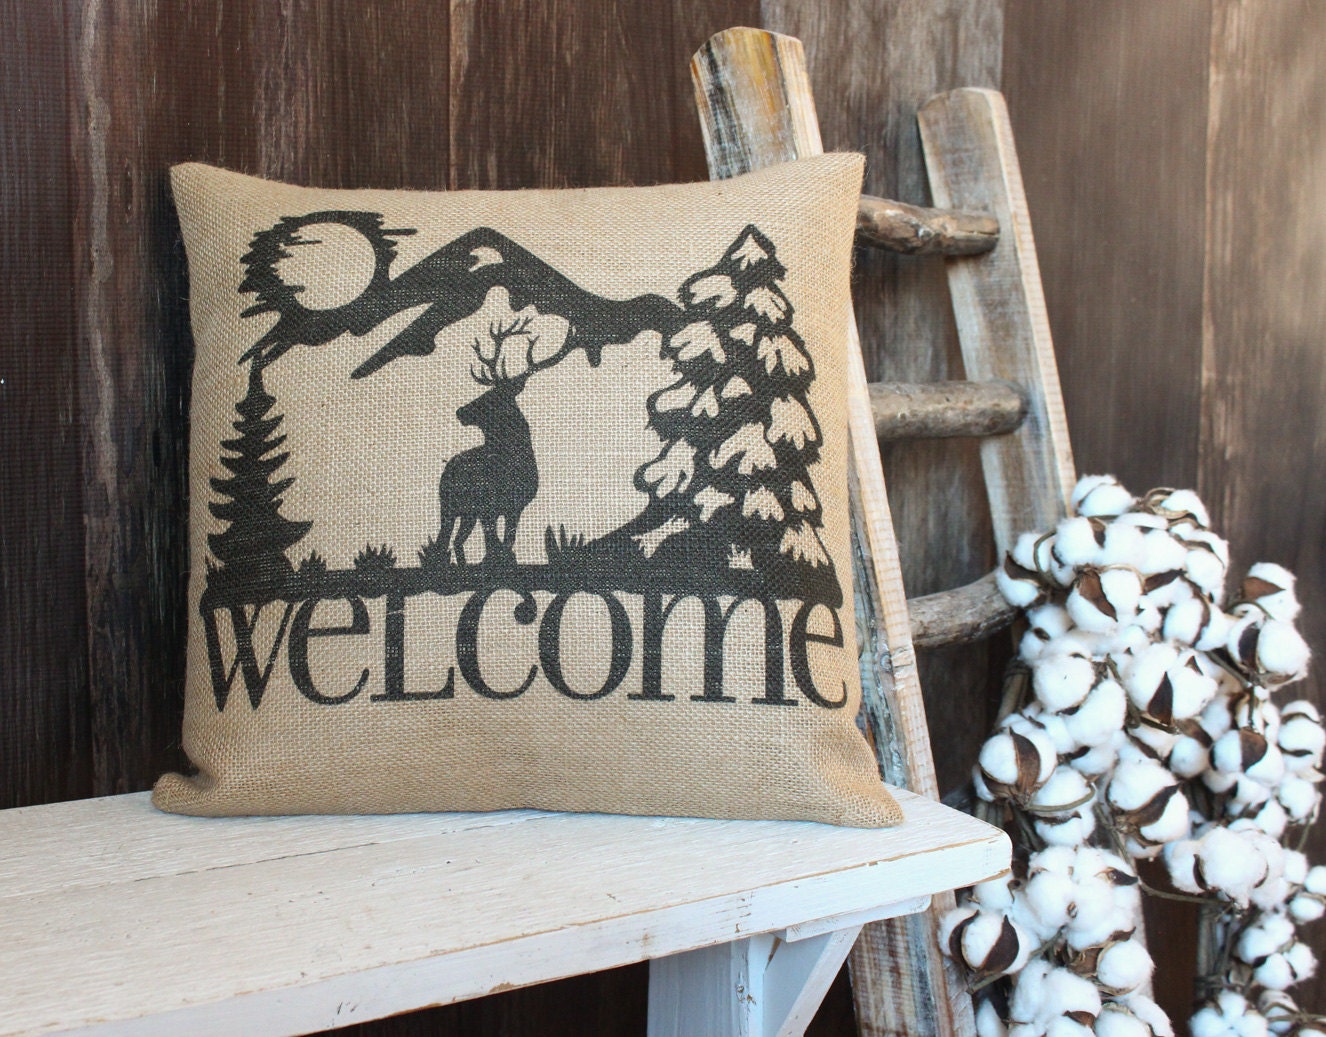 Rustic style Elk Welcome burlap throw pillow w/ Elk and Mountains for cabin  hunting lodge style outdoorsman gift for hunters